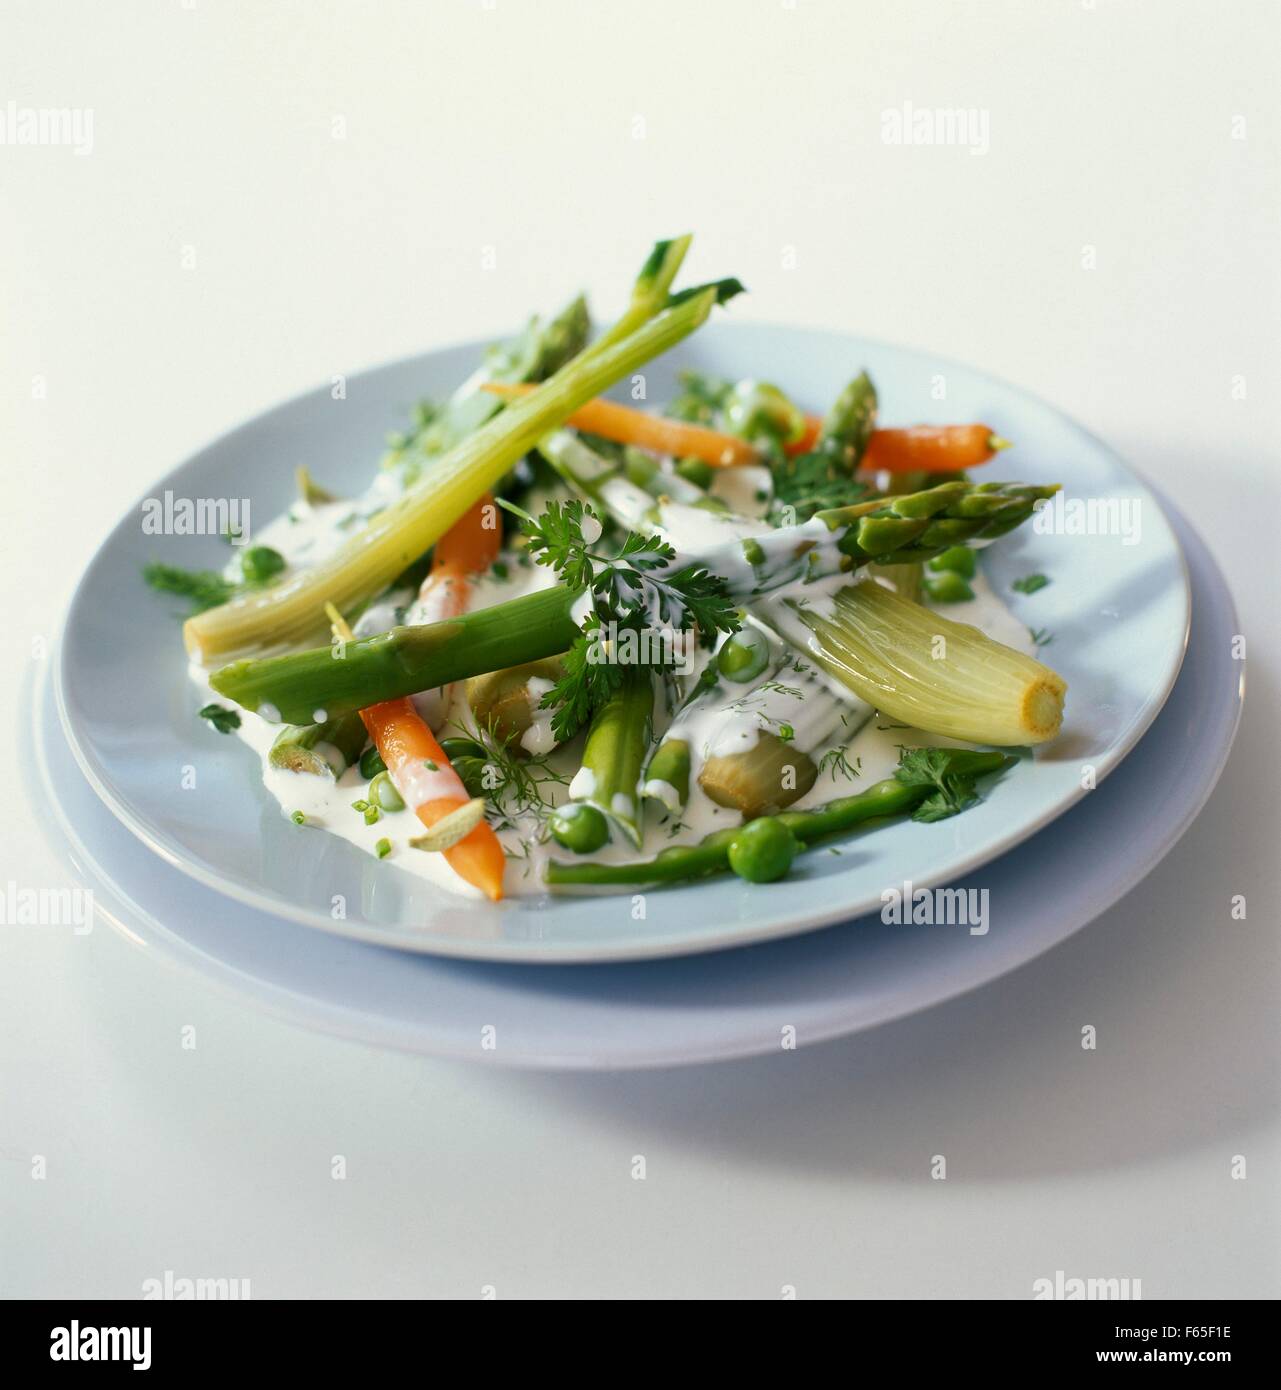 Plate of spring vegetables Stock Photo